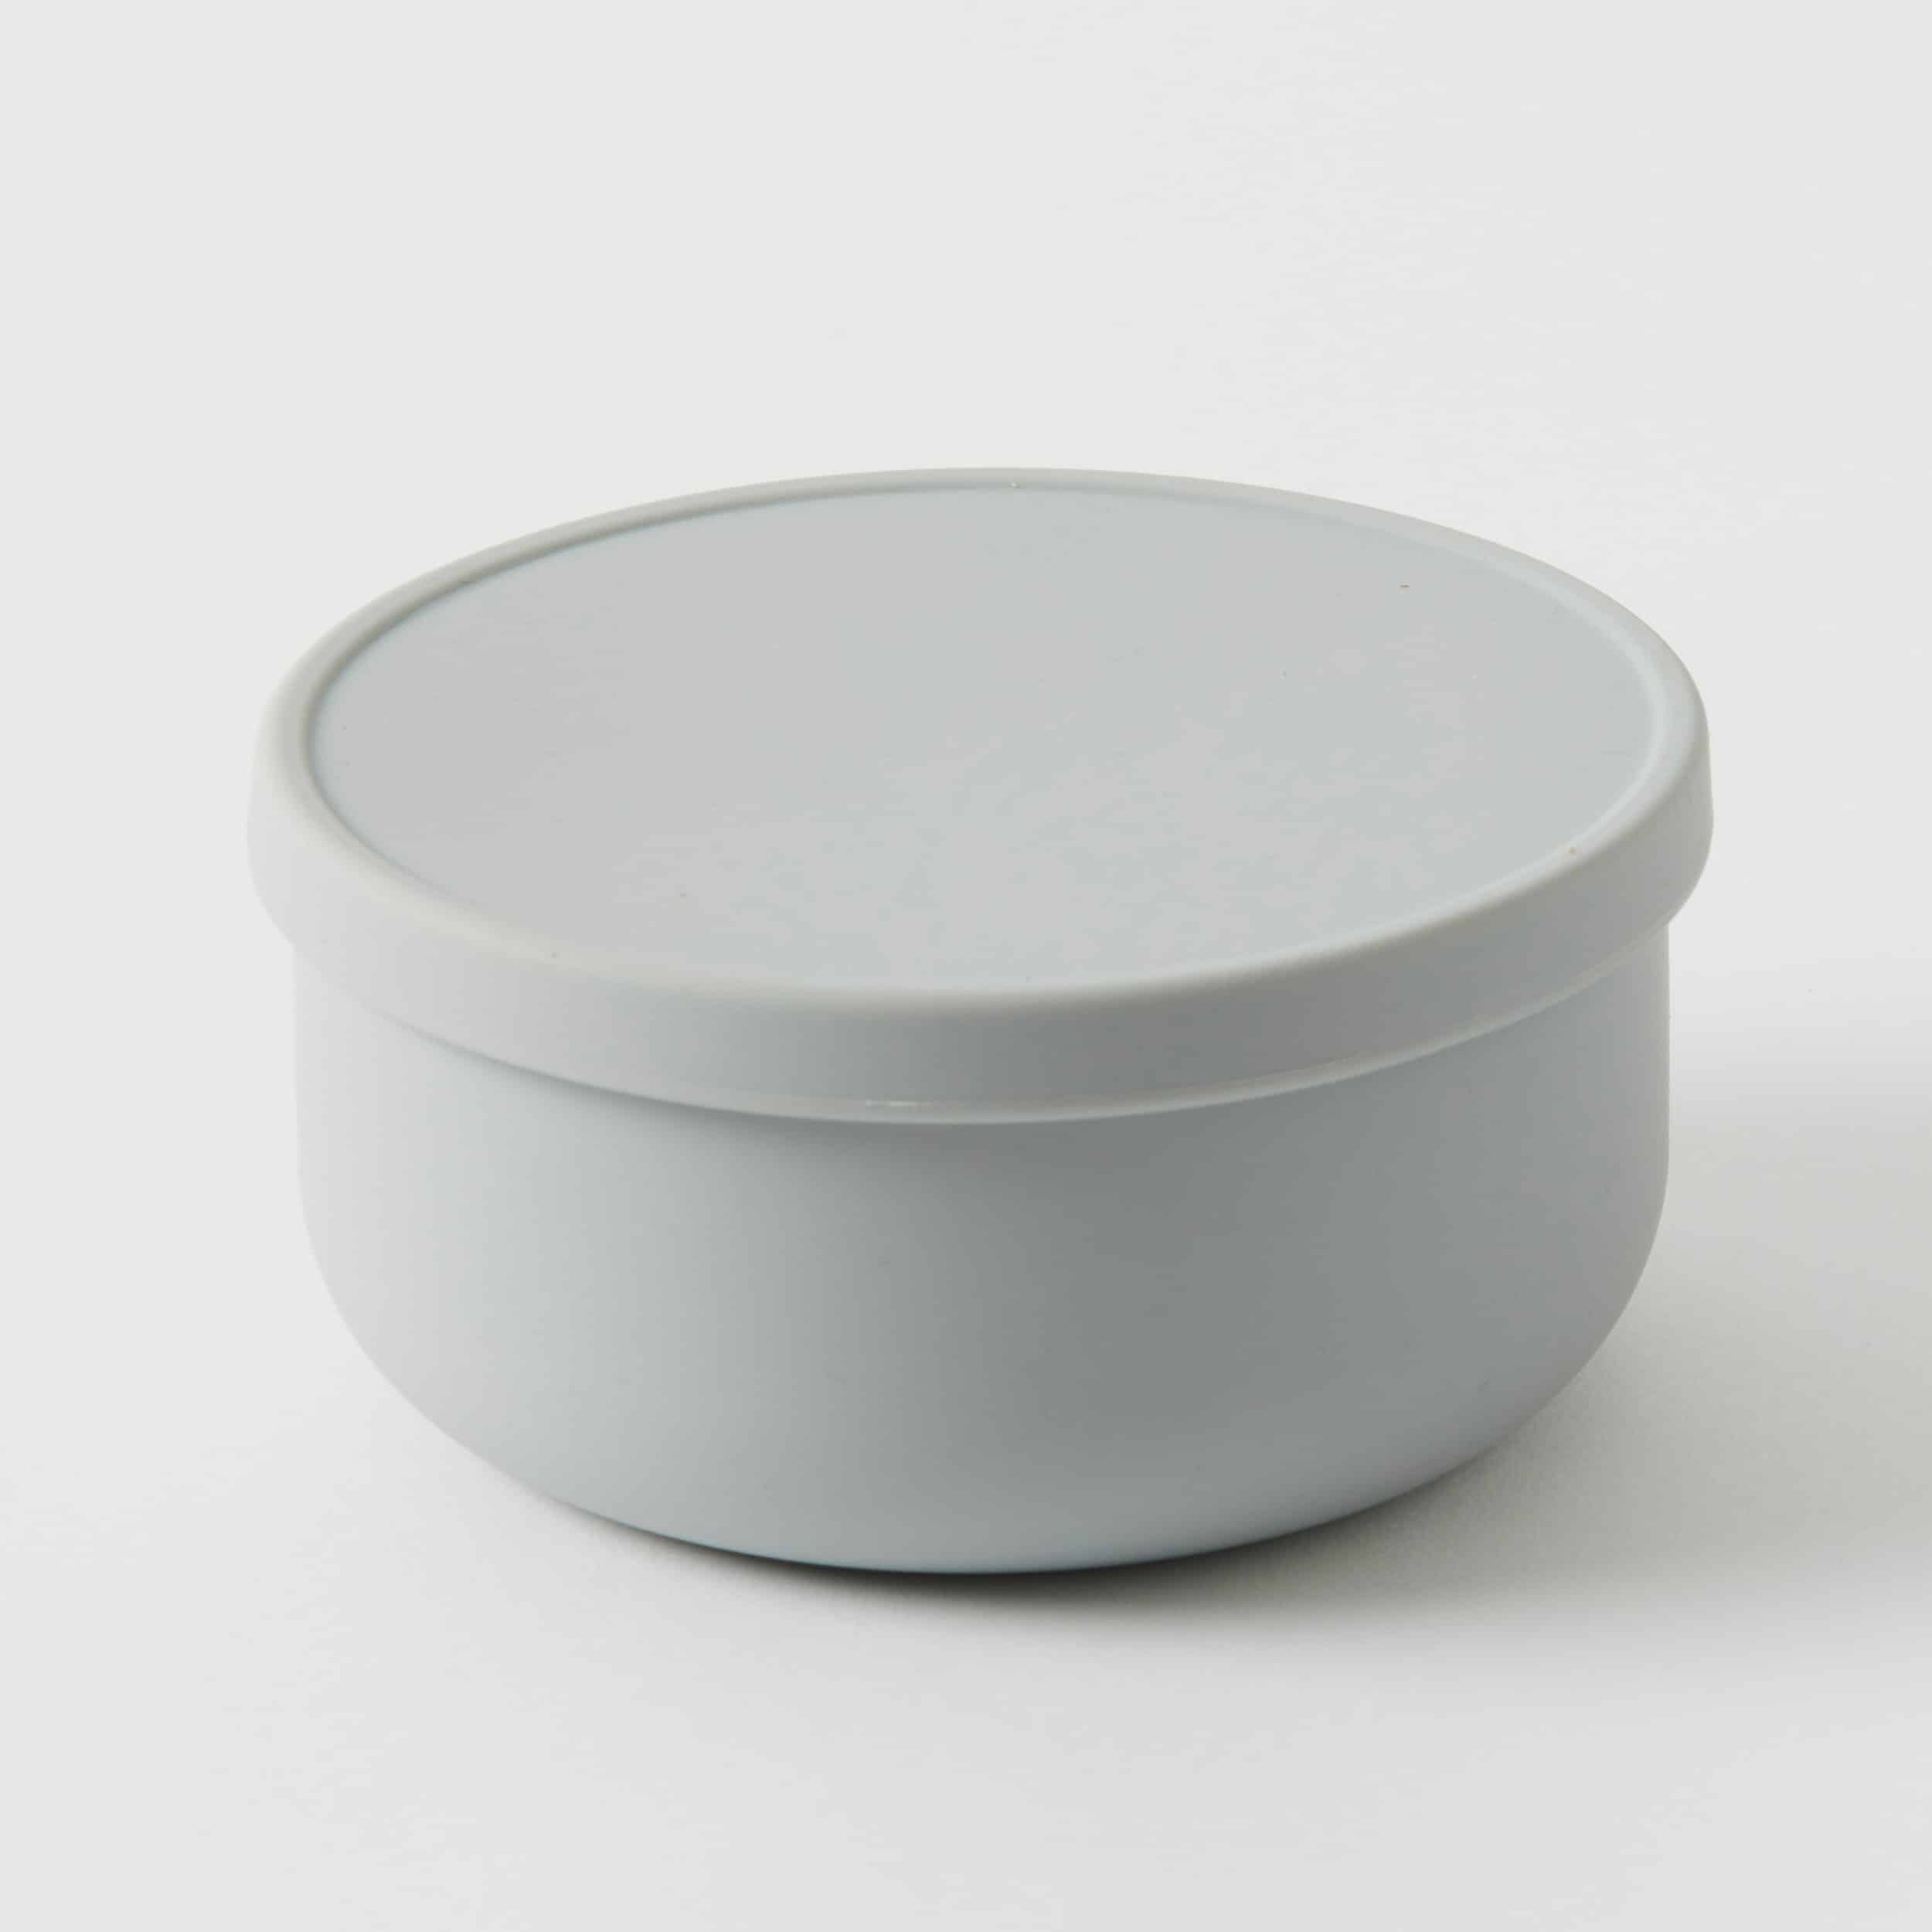 Buy Nordic Kids - Henny Silicone Bowl W/Lid - Steele Buy Gift, Clothing ...